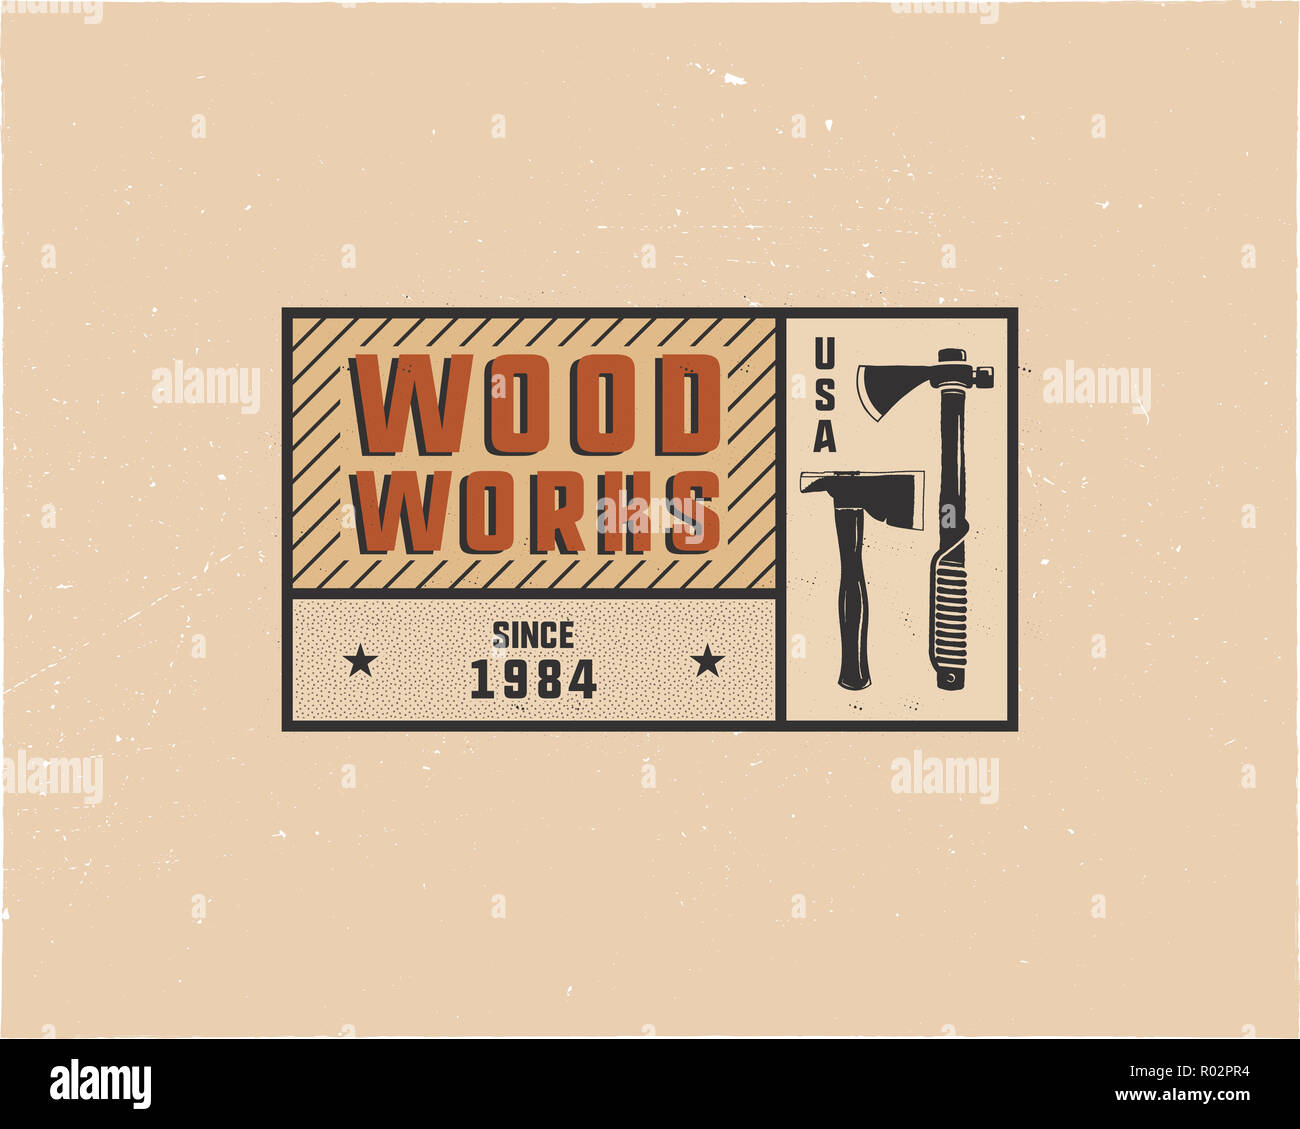 Vintage hand drawn woodworks tag logo and emblem. Carpentry service label, patch. Typography lumberjack insignia with axes and texts. Retro colors style. Stock illusration isolated on white. Stock Photo